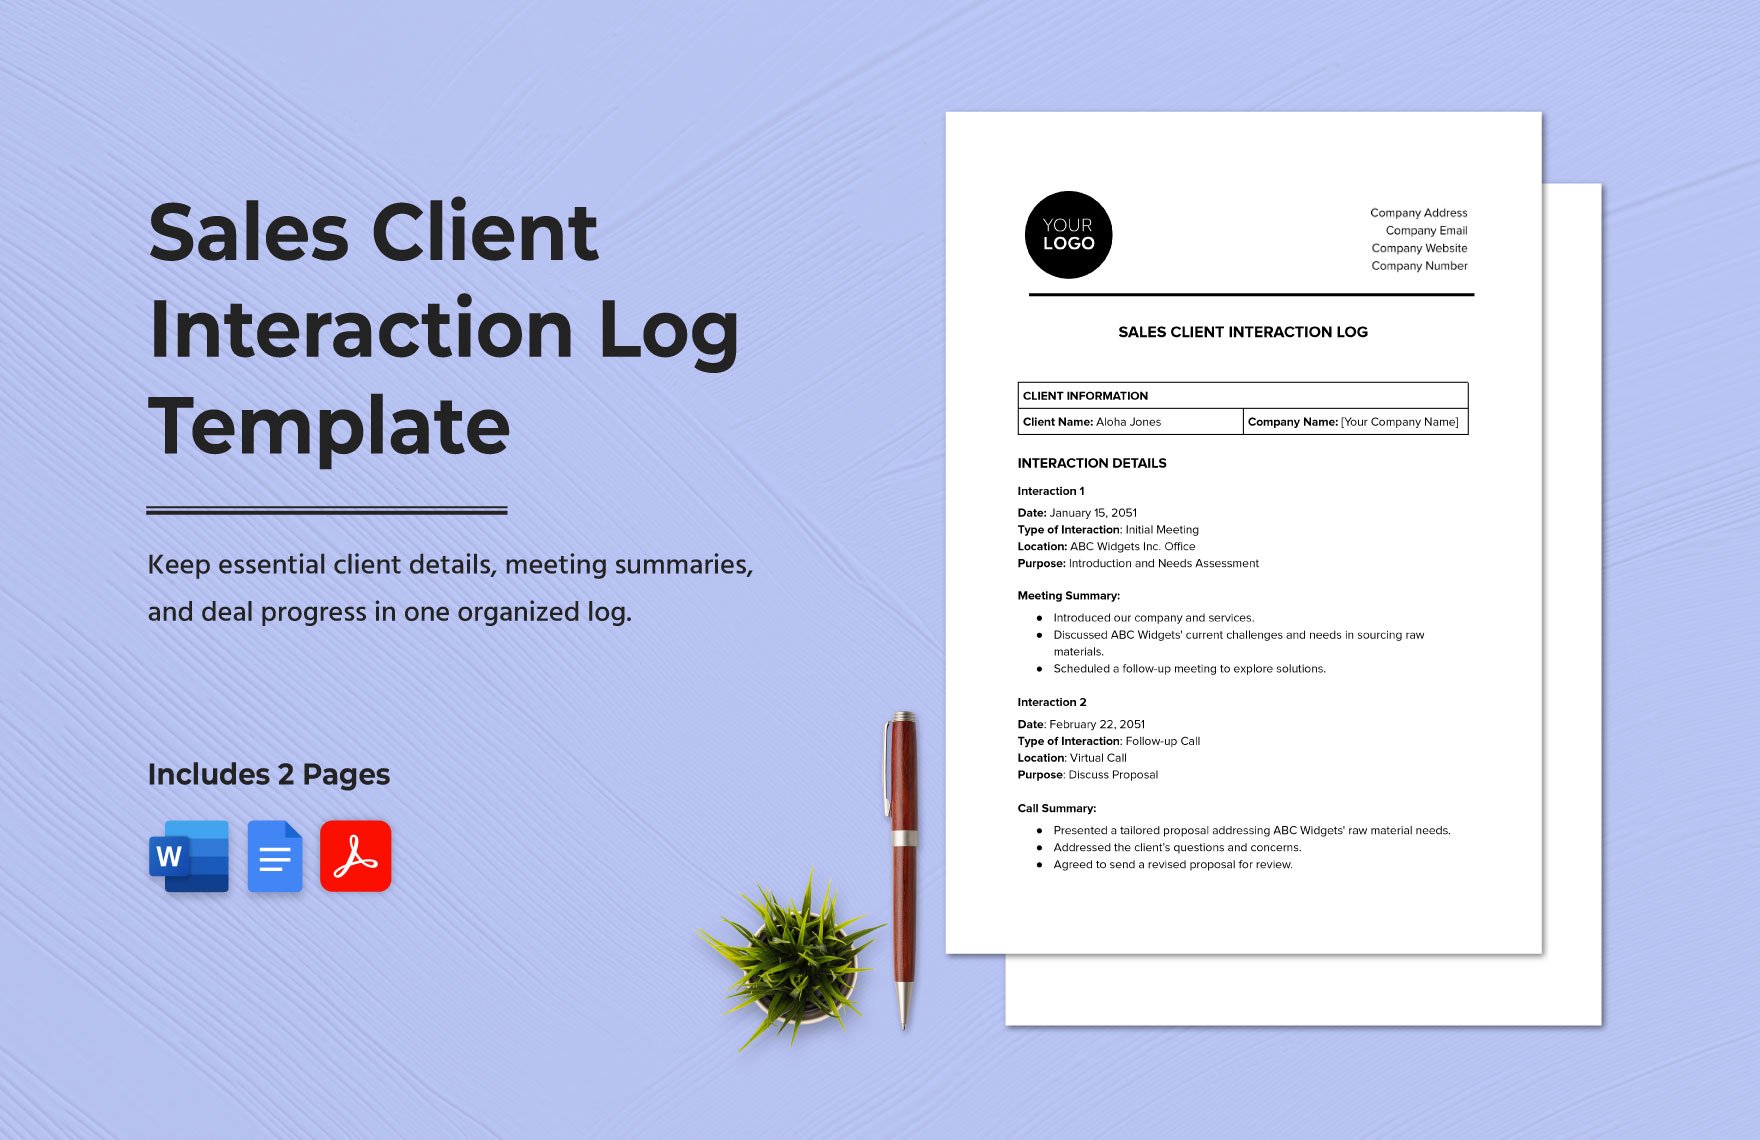 Sales Client Interaction Log Template in Word, Google Docs, PDF